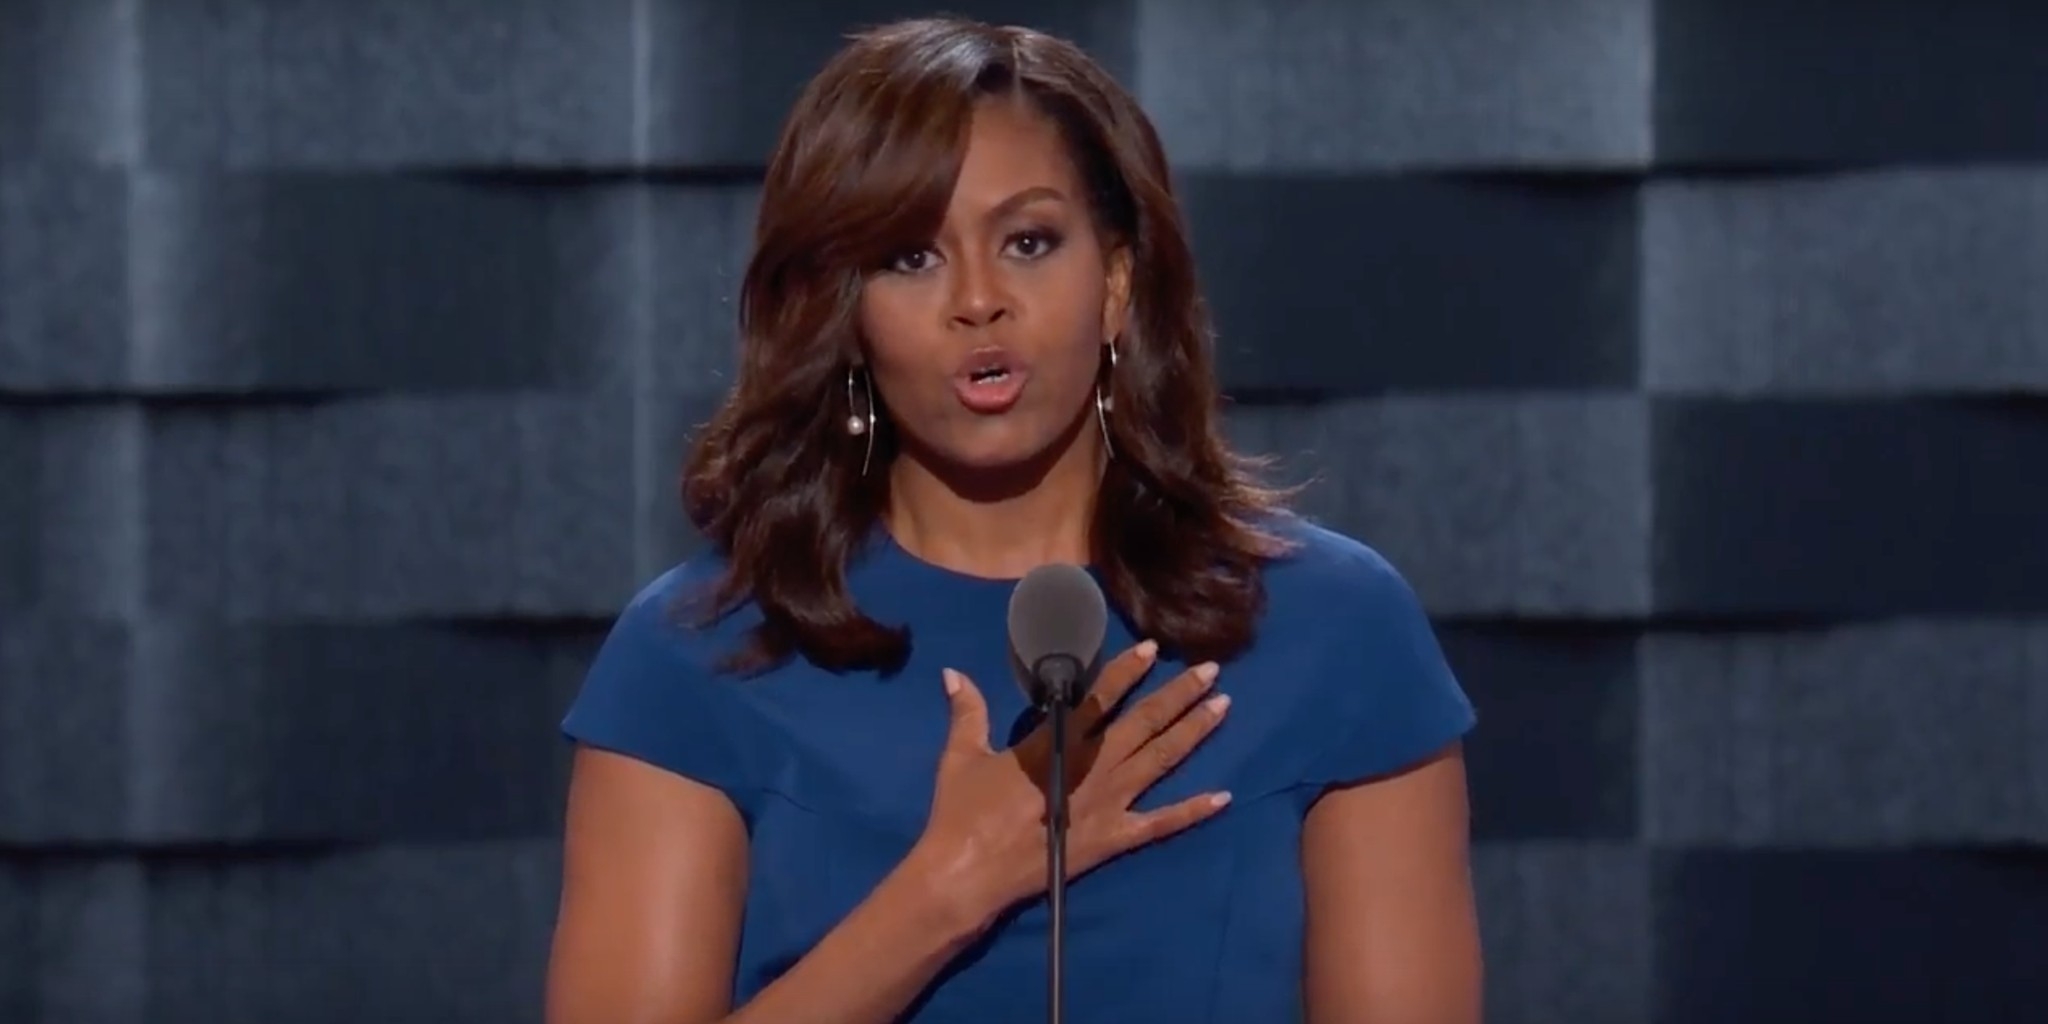 Michelle Obama: Who Do You Want For Your Children’s Role Model?